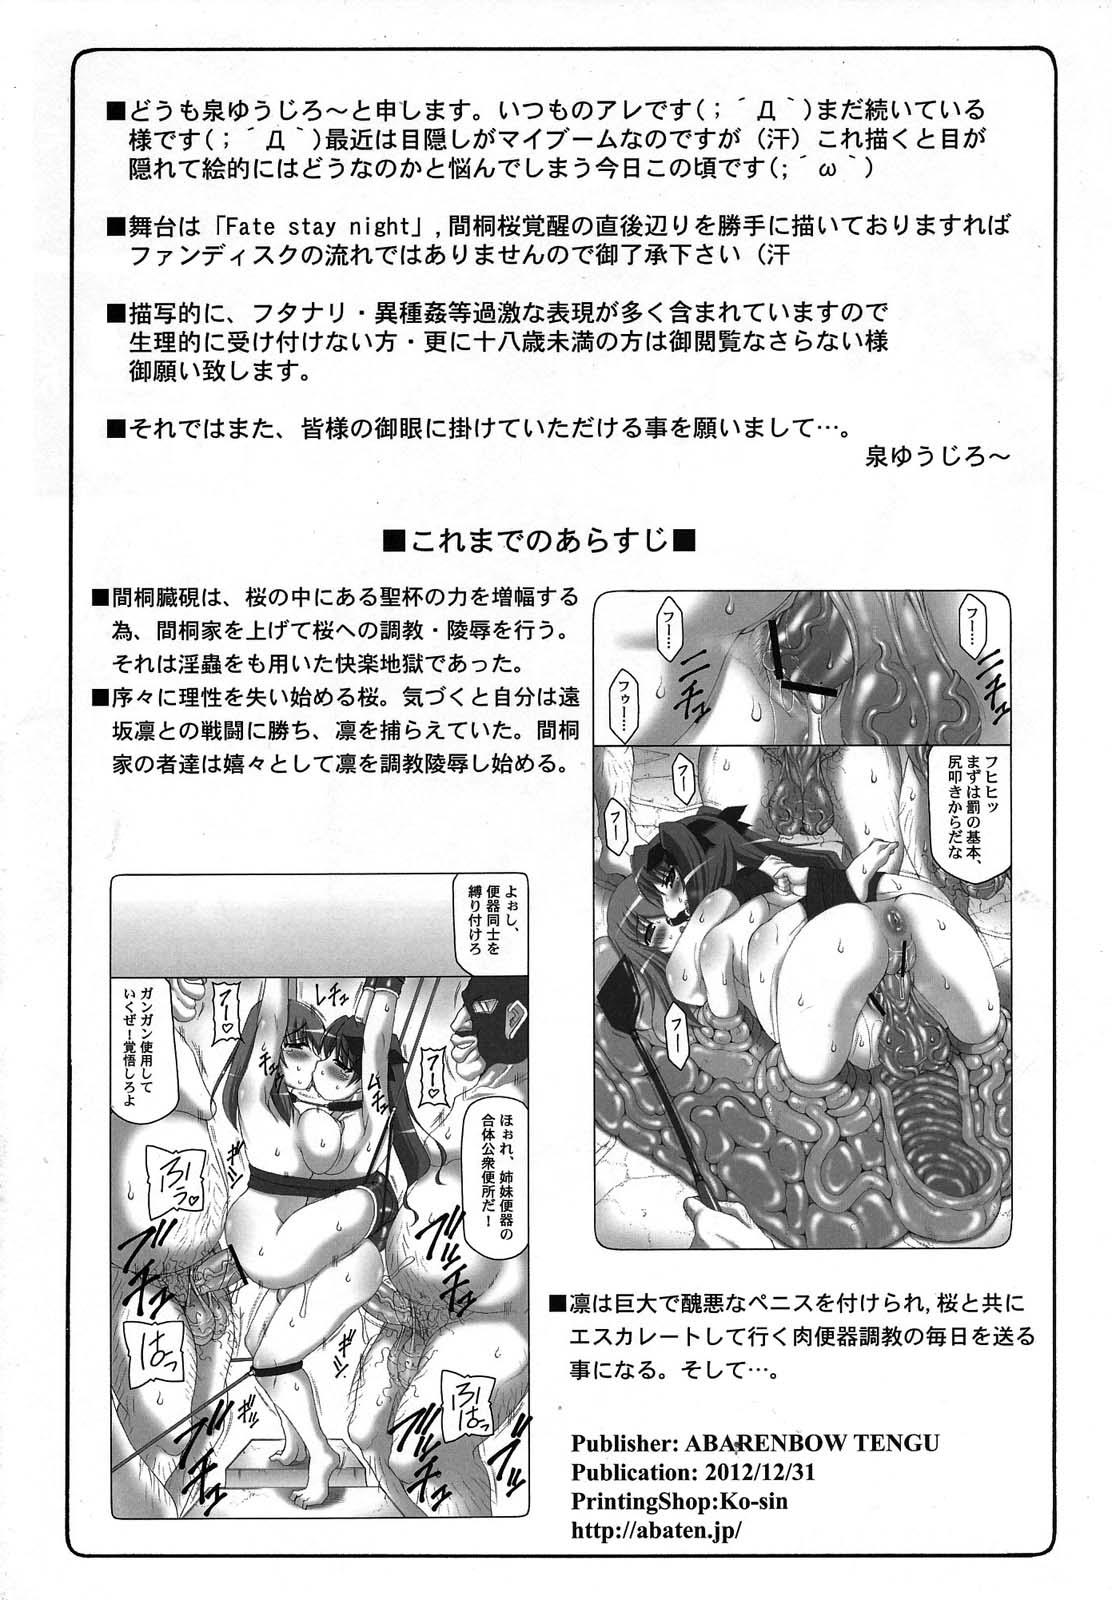 Best Blowjobs Ever Kotori 9 - Fate stay night Deep - Page 3